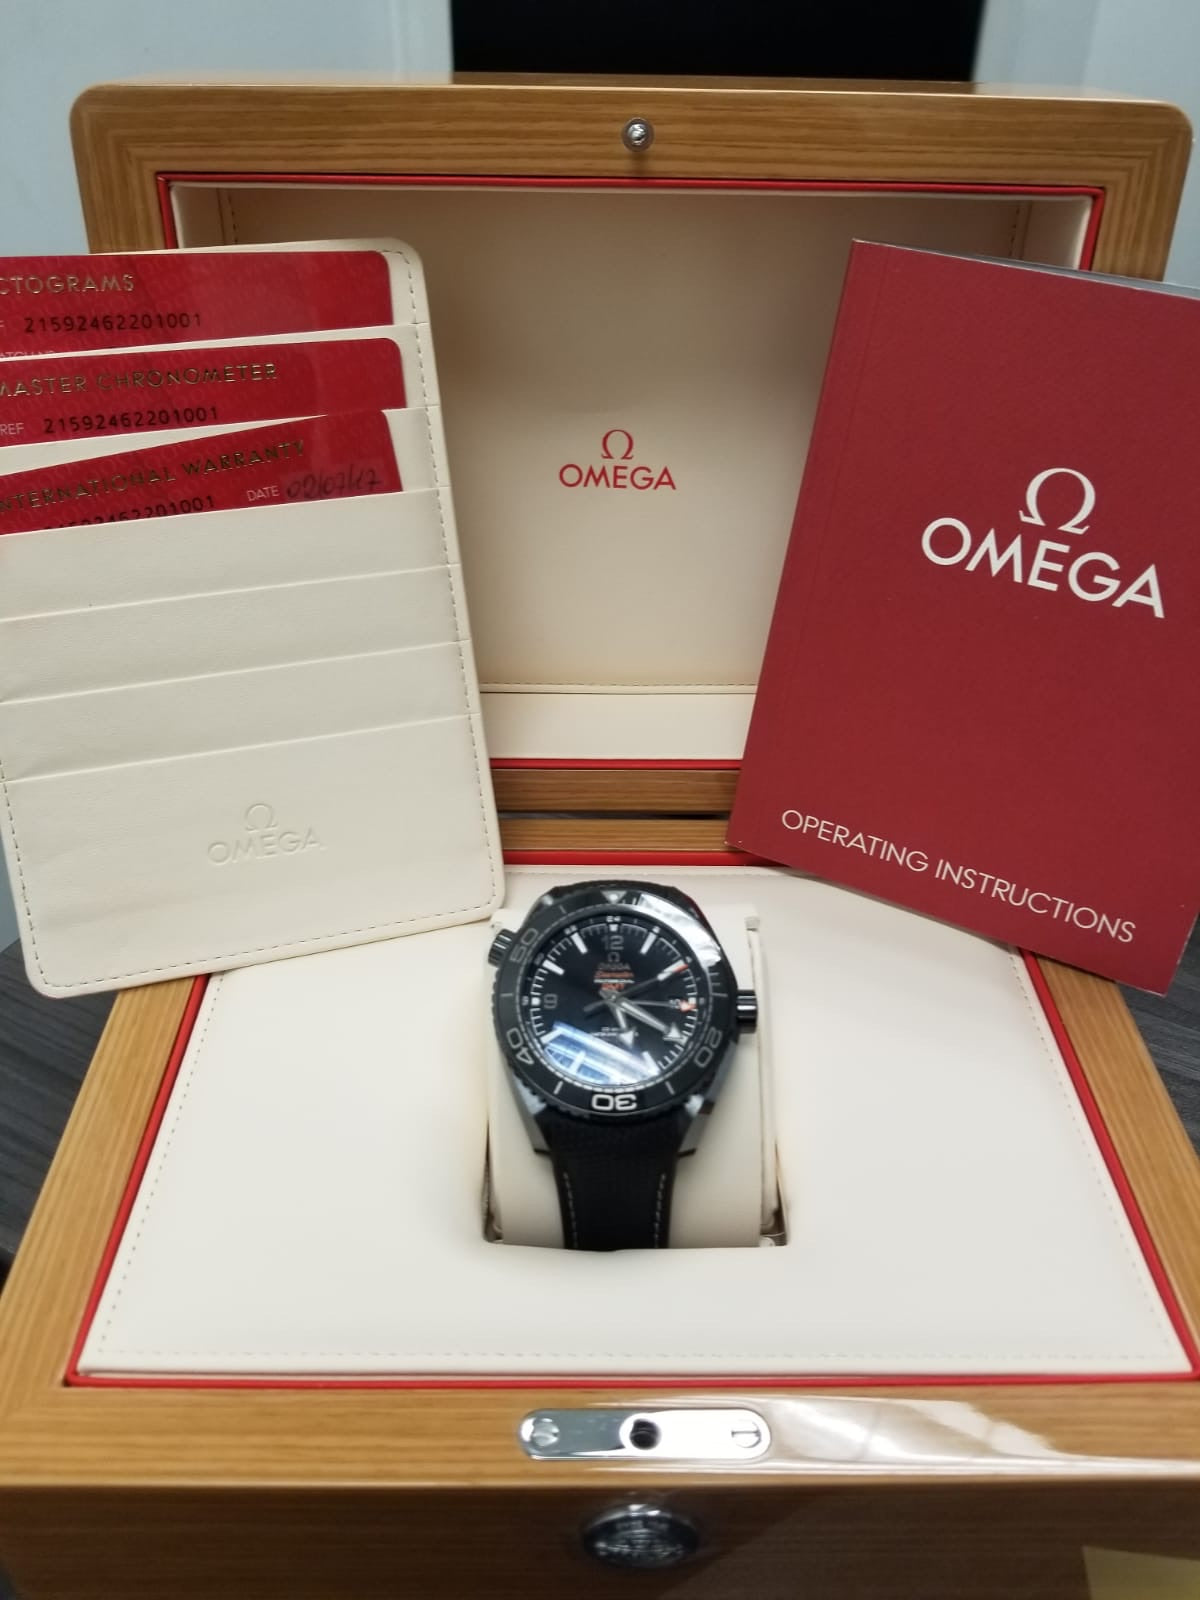 Omega 215.92.46.22.01.001 Planet Ocean 600m Co-Axial Master Chronometer GMT 45.5mm Mens Watch